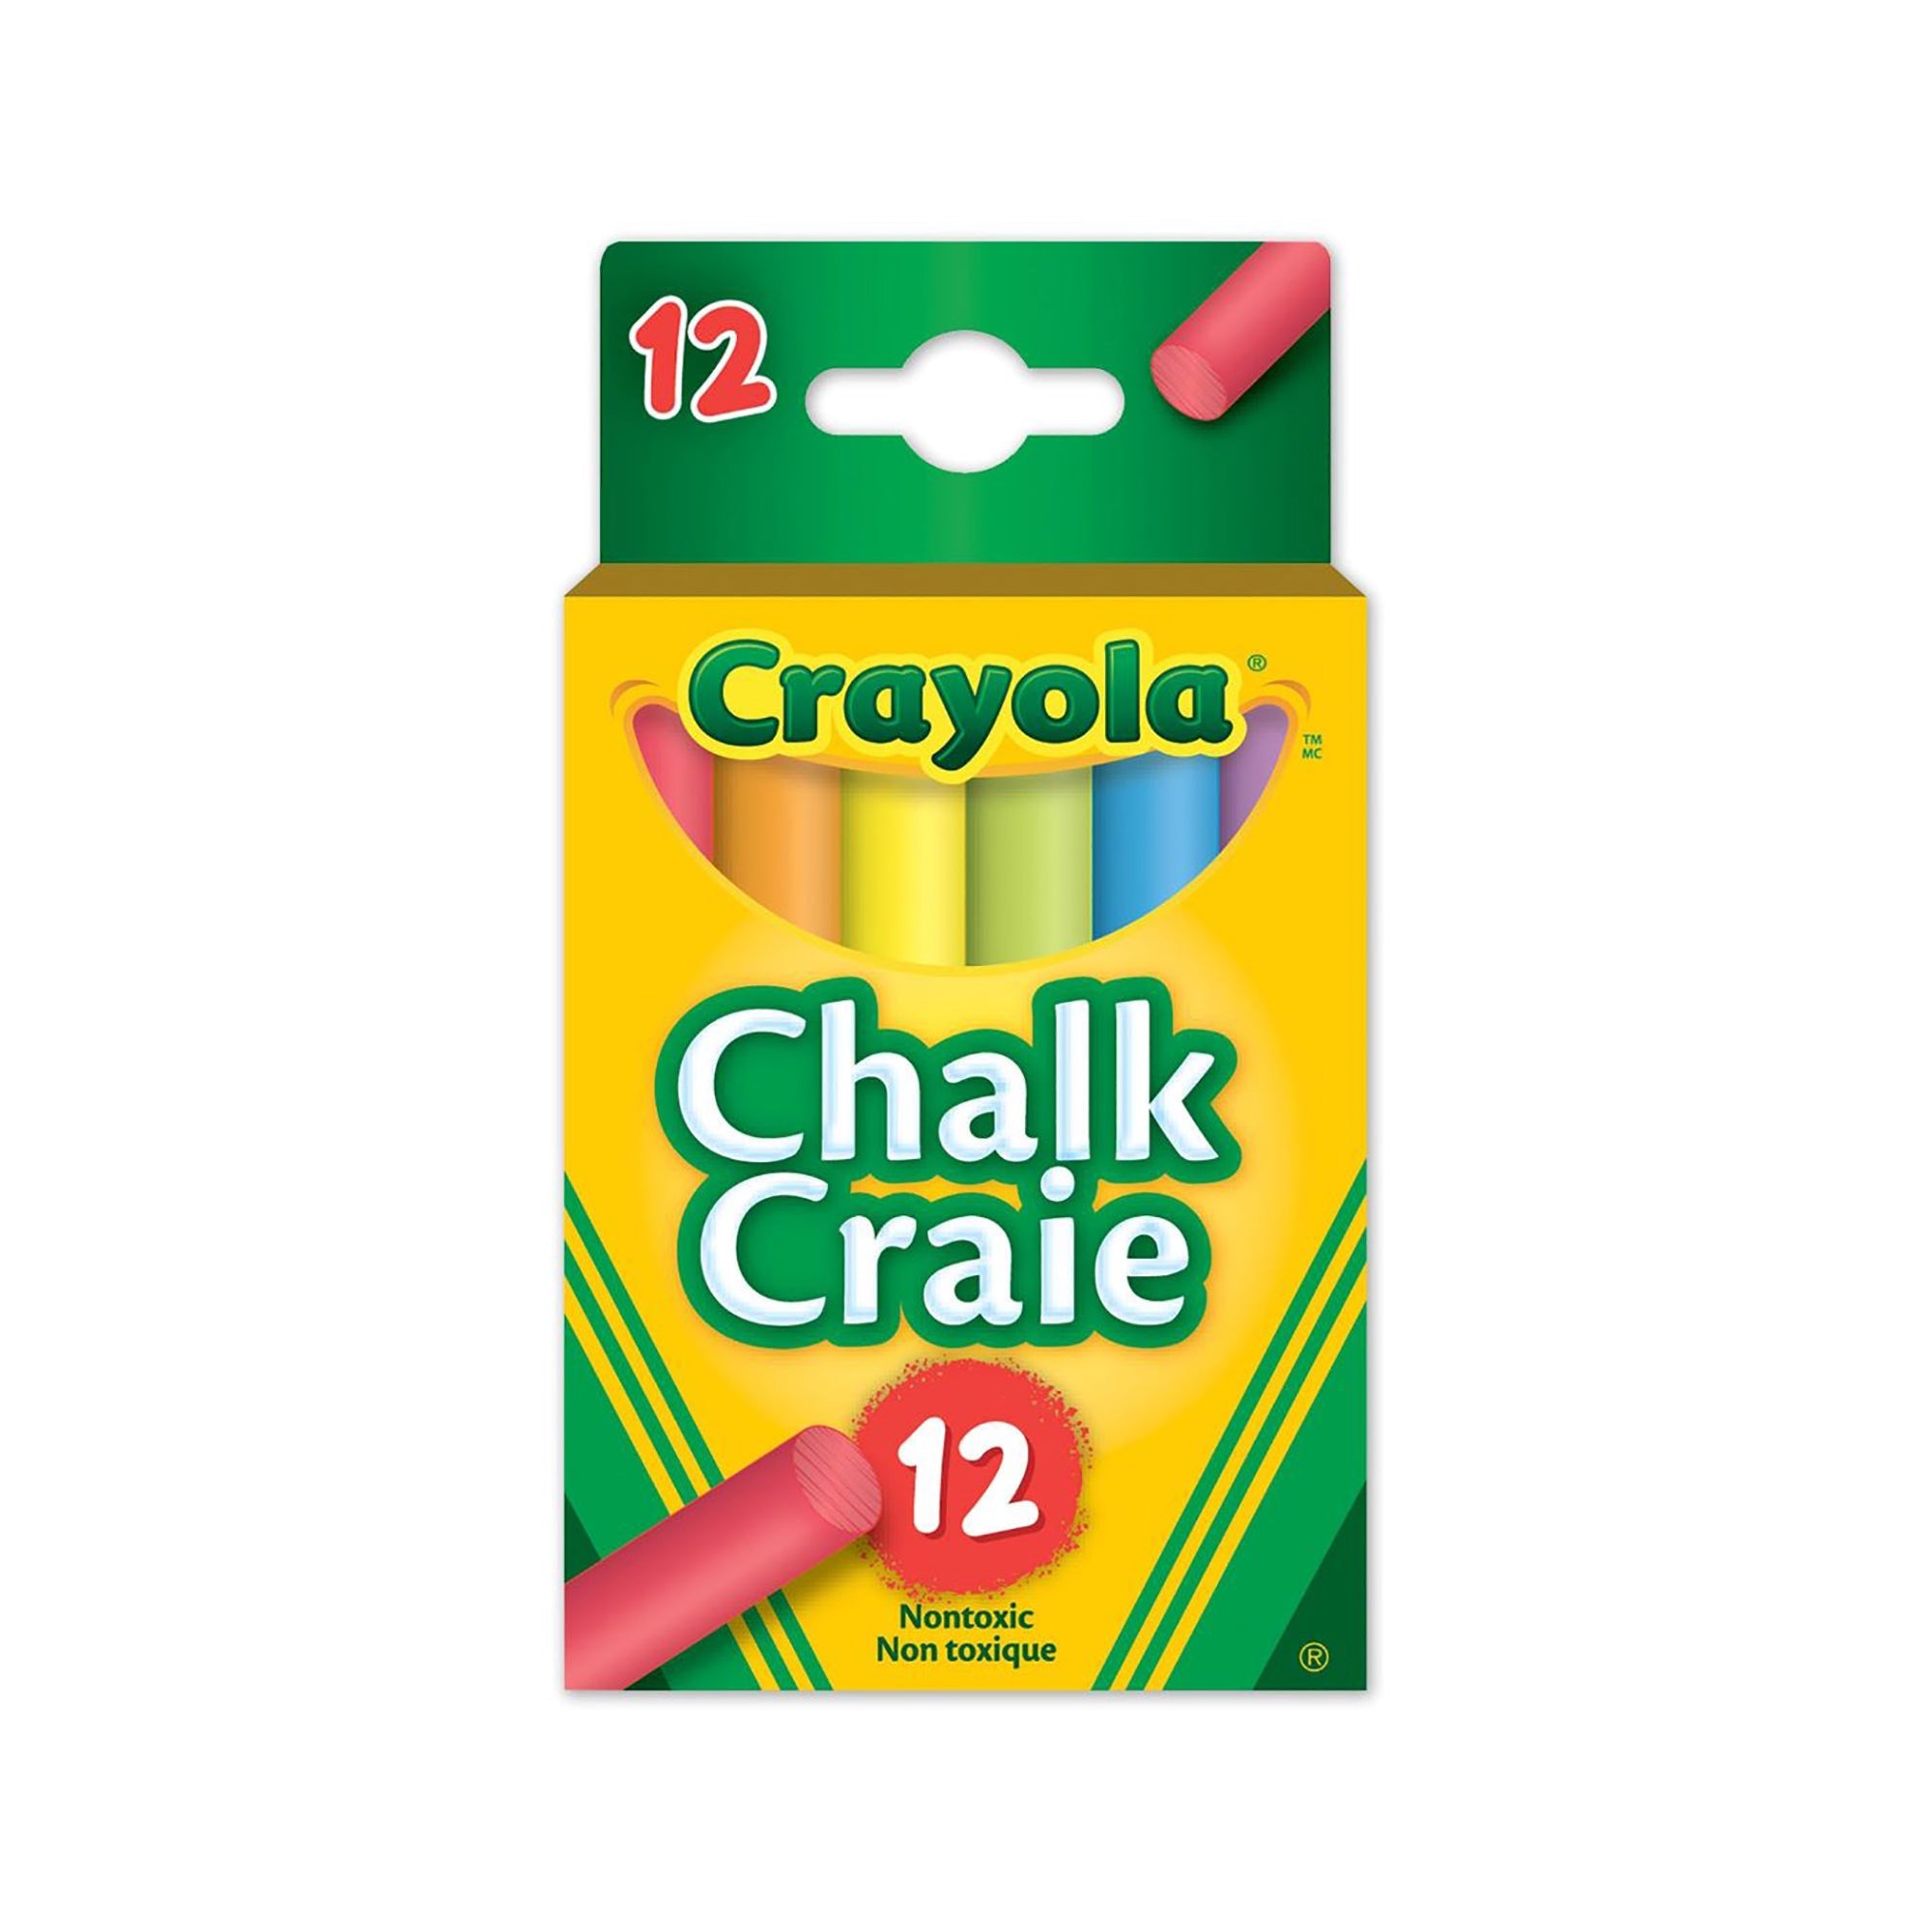 Crayola 12 Colored Dustless Chalks - Non-toxic 3in